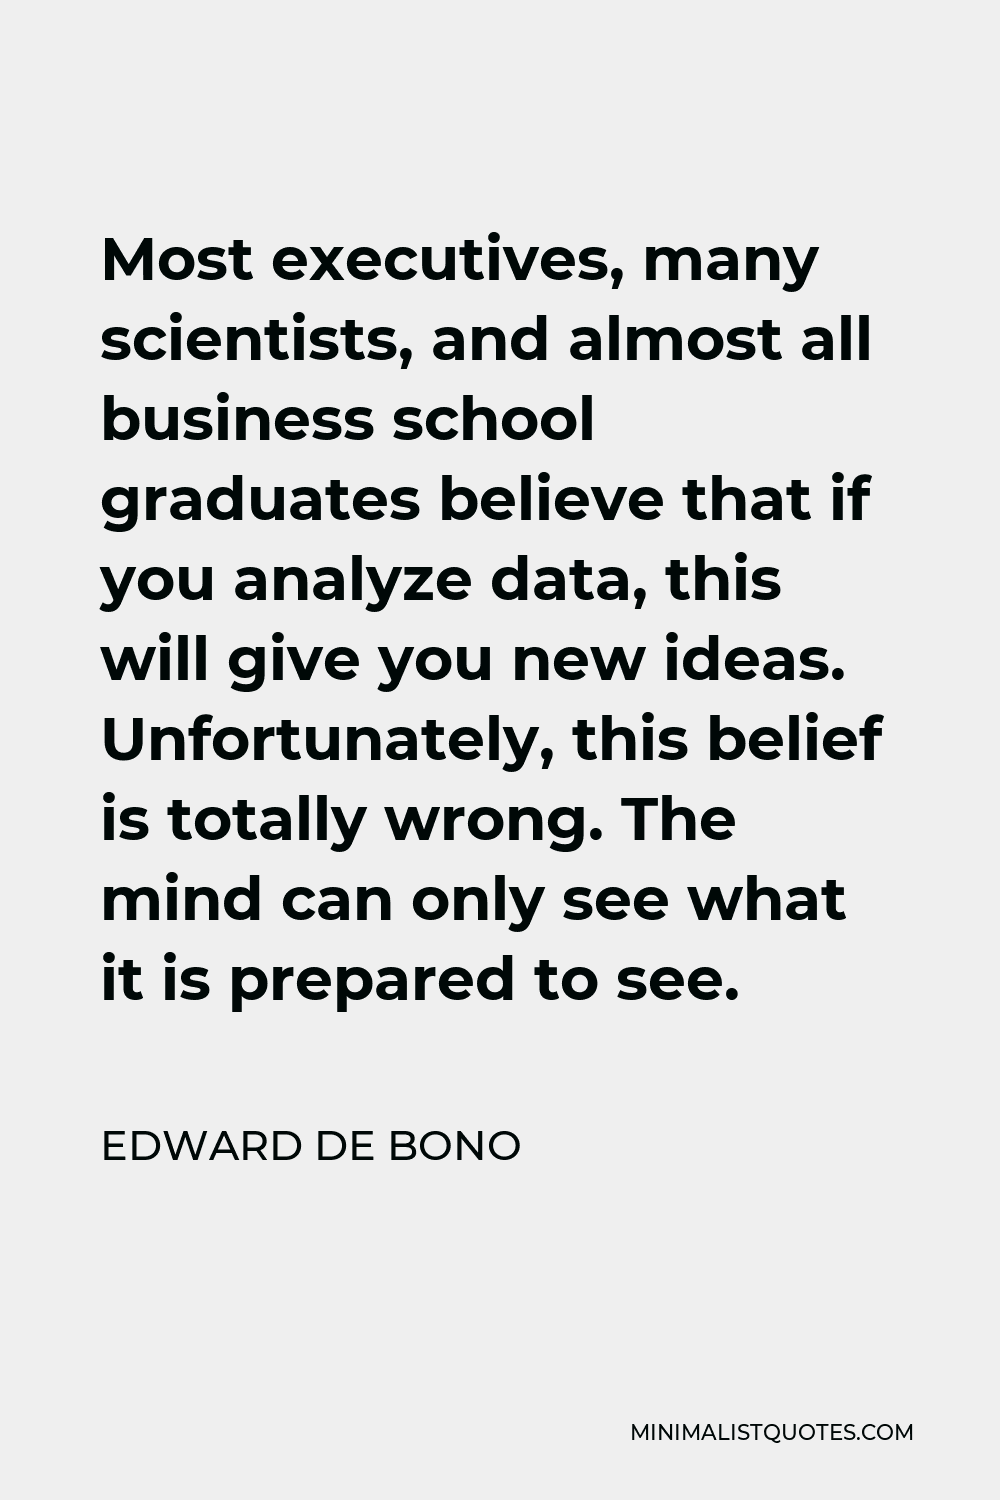 Edward de Bono Quote - Most executives, many scientists, and almost all business school graduates believe that if you analyze data, this will give you new ideas. Unfortunately, this belief is totally wrong. The mind can only see what it is prepared to see.